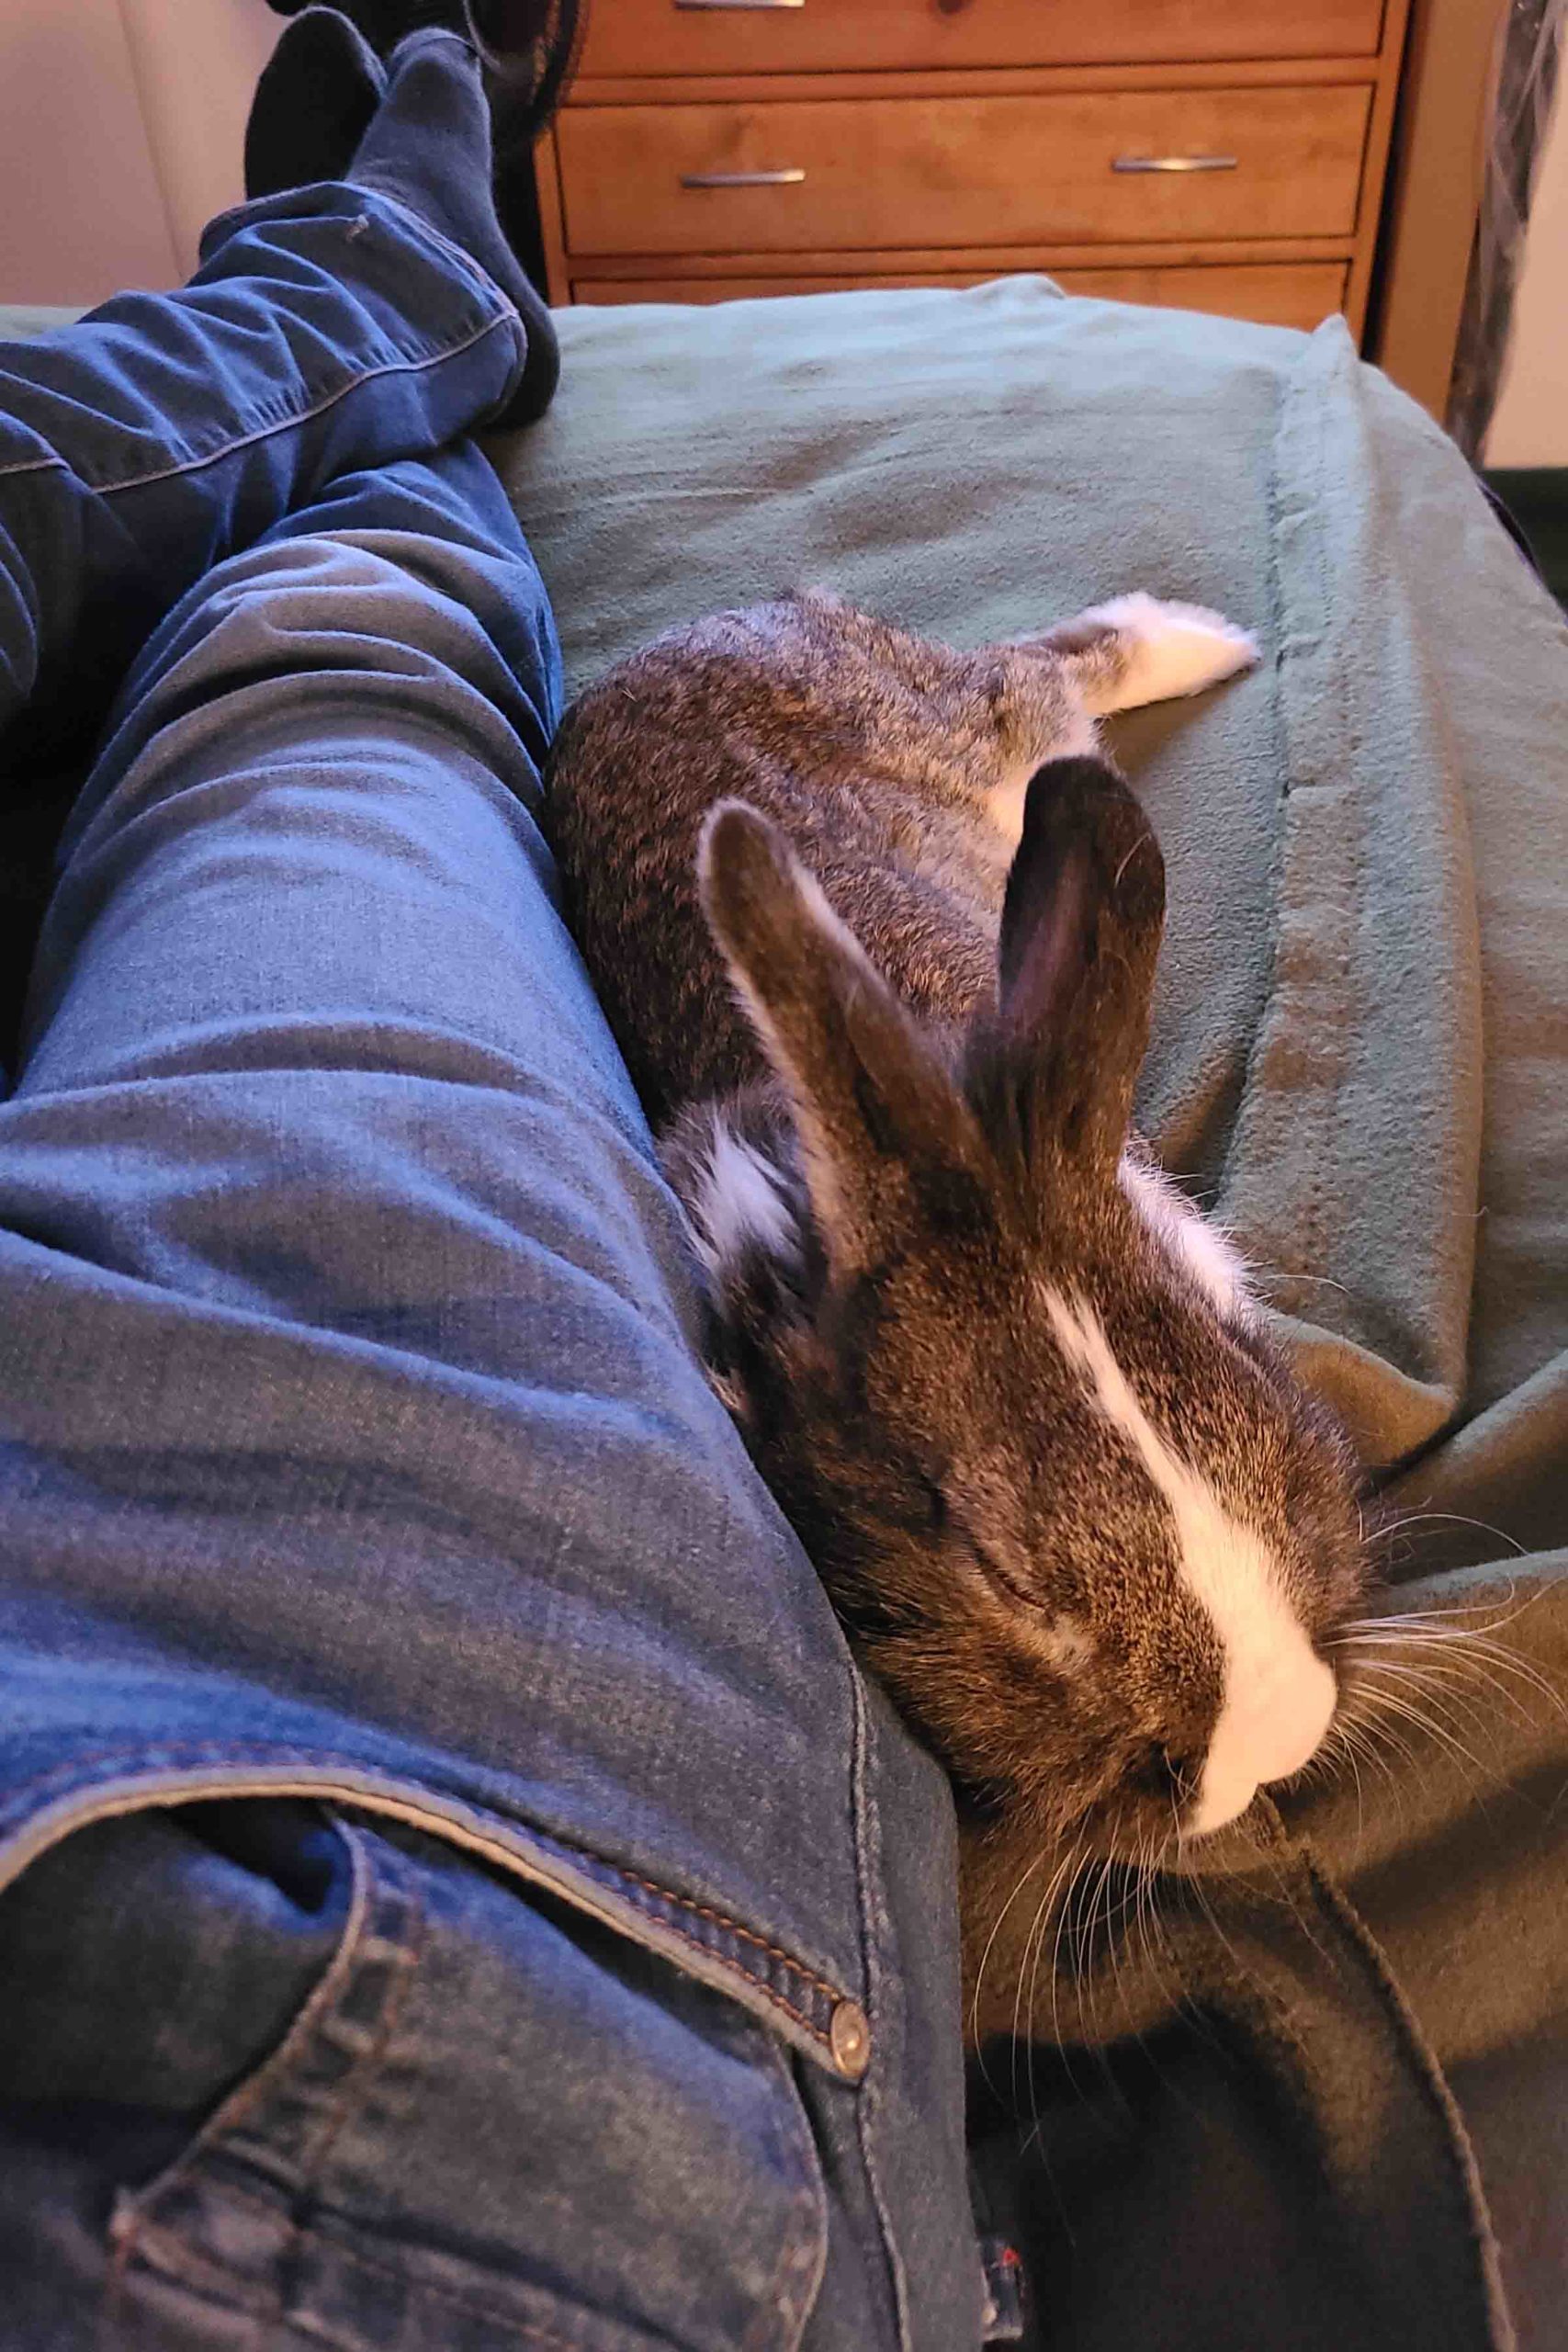 Ezno tries his best to be a foster fail by snuggling up to Dad. 